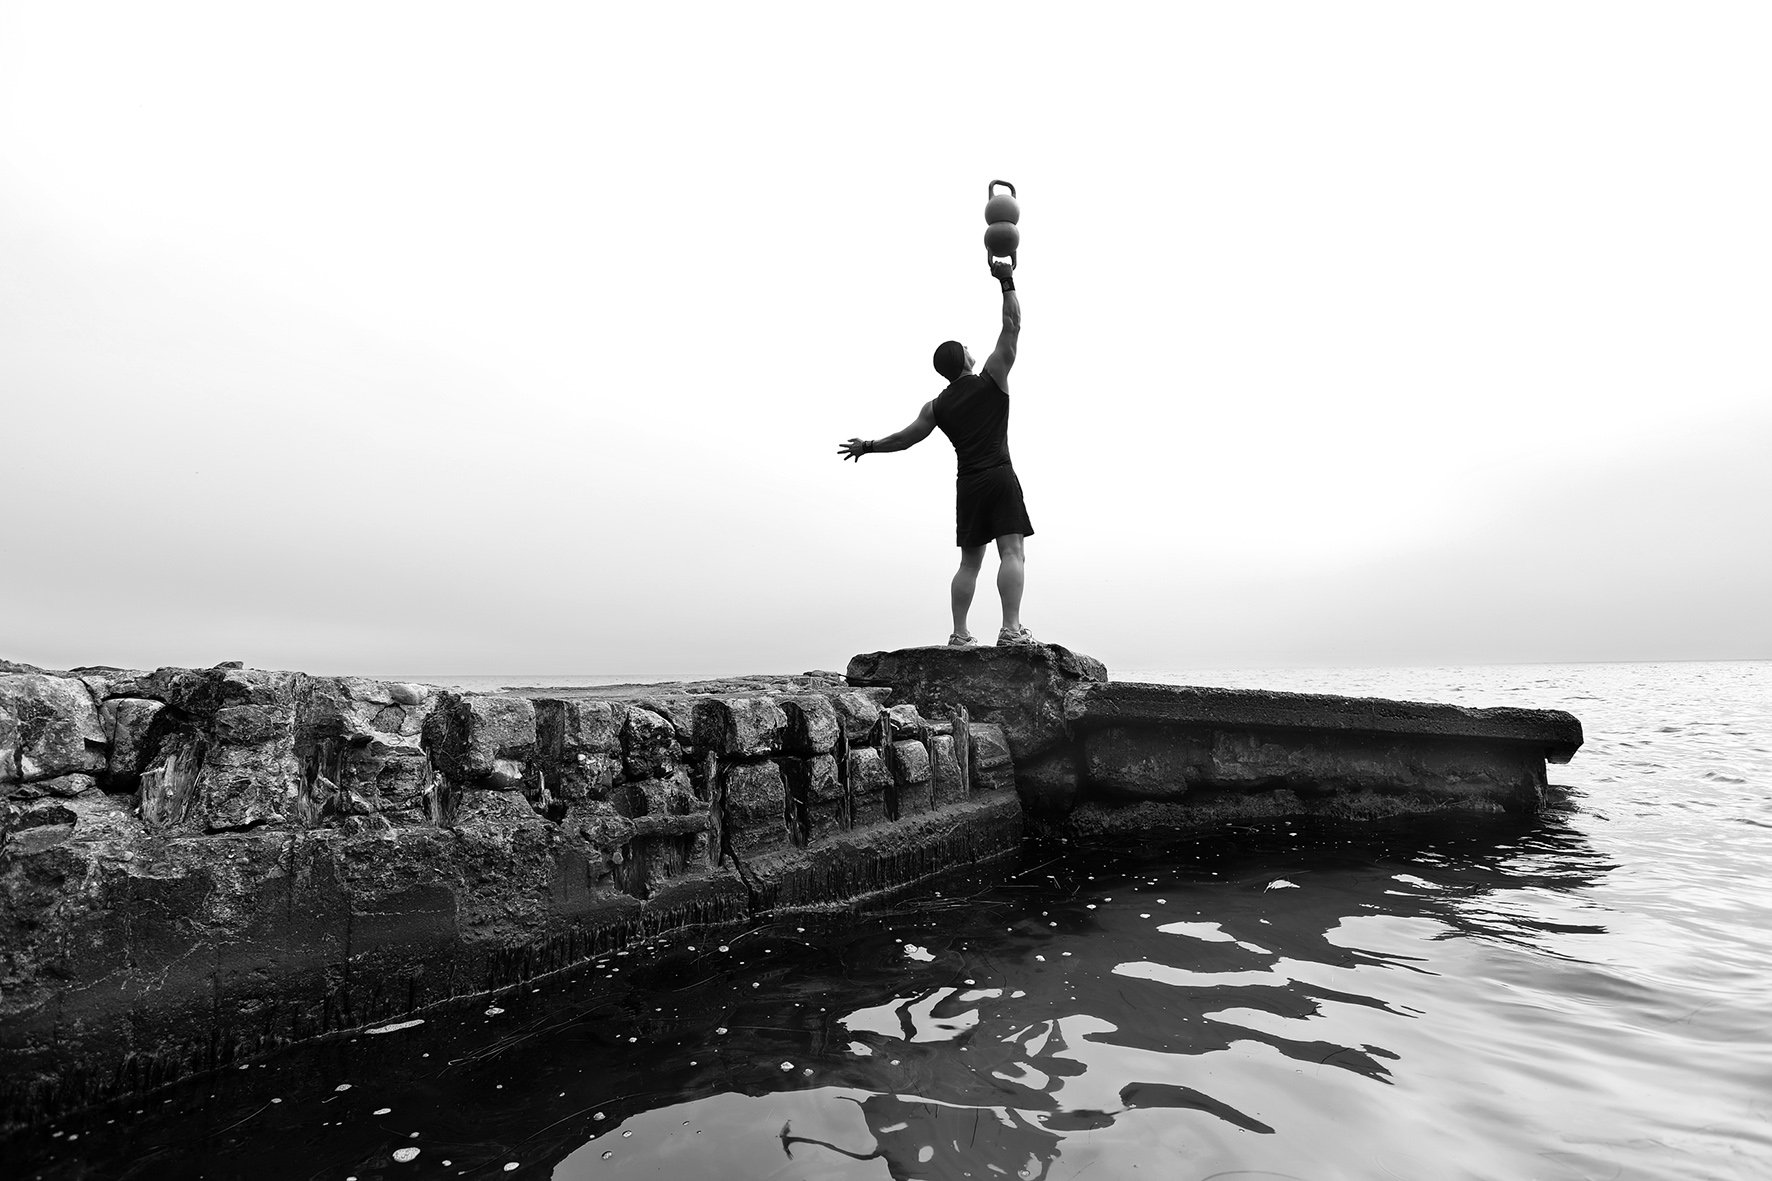 Man in training outfit balancing two kettlebells on top of eachother in one arm streched overhead, on old concrete pier surrounded by water.jpg